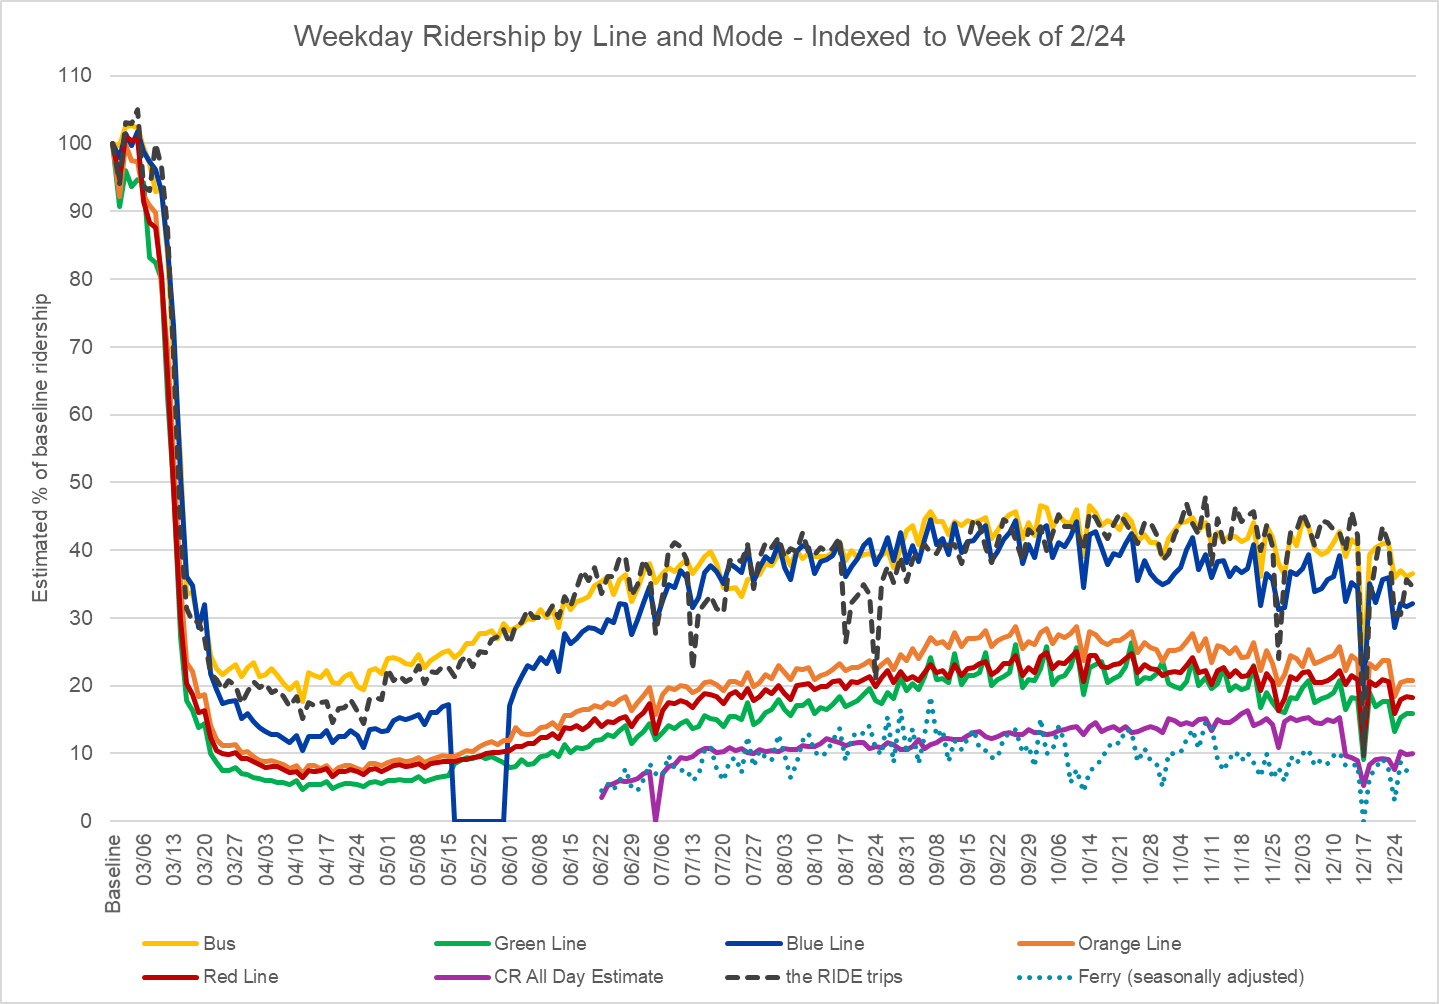 Chart showing weekday ridership on all MBTA modes indexed to February 2020